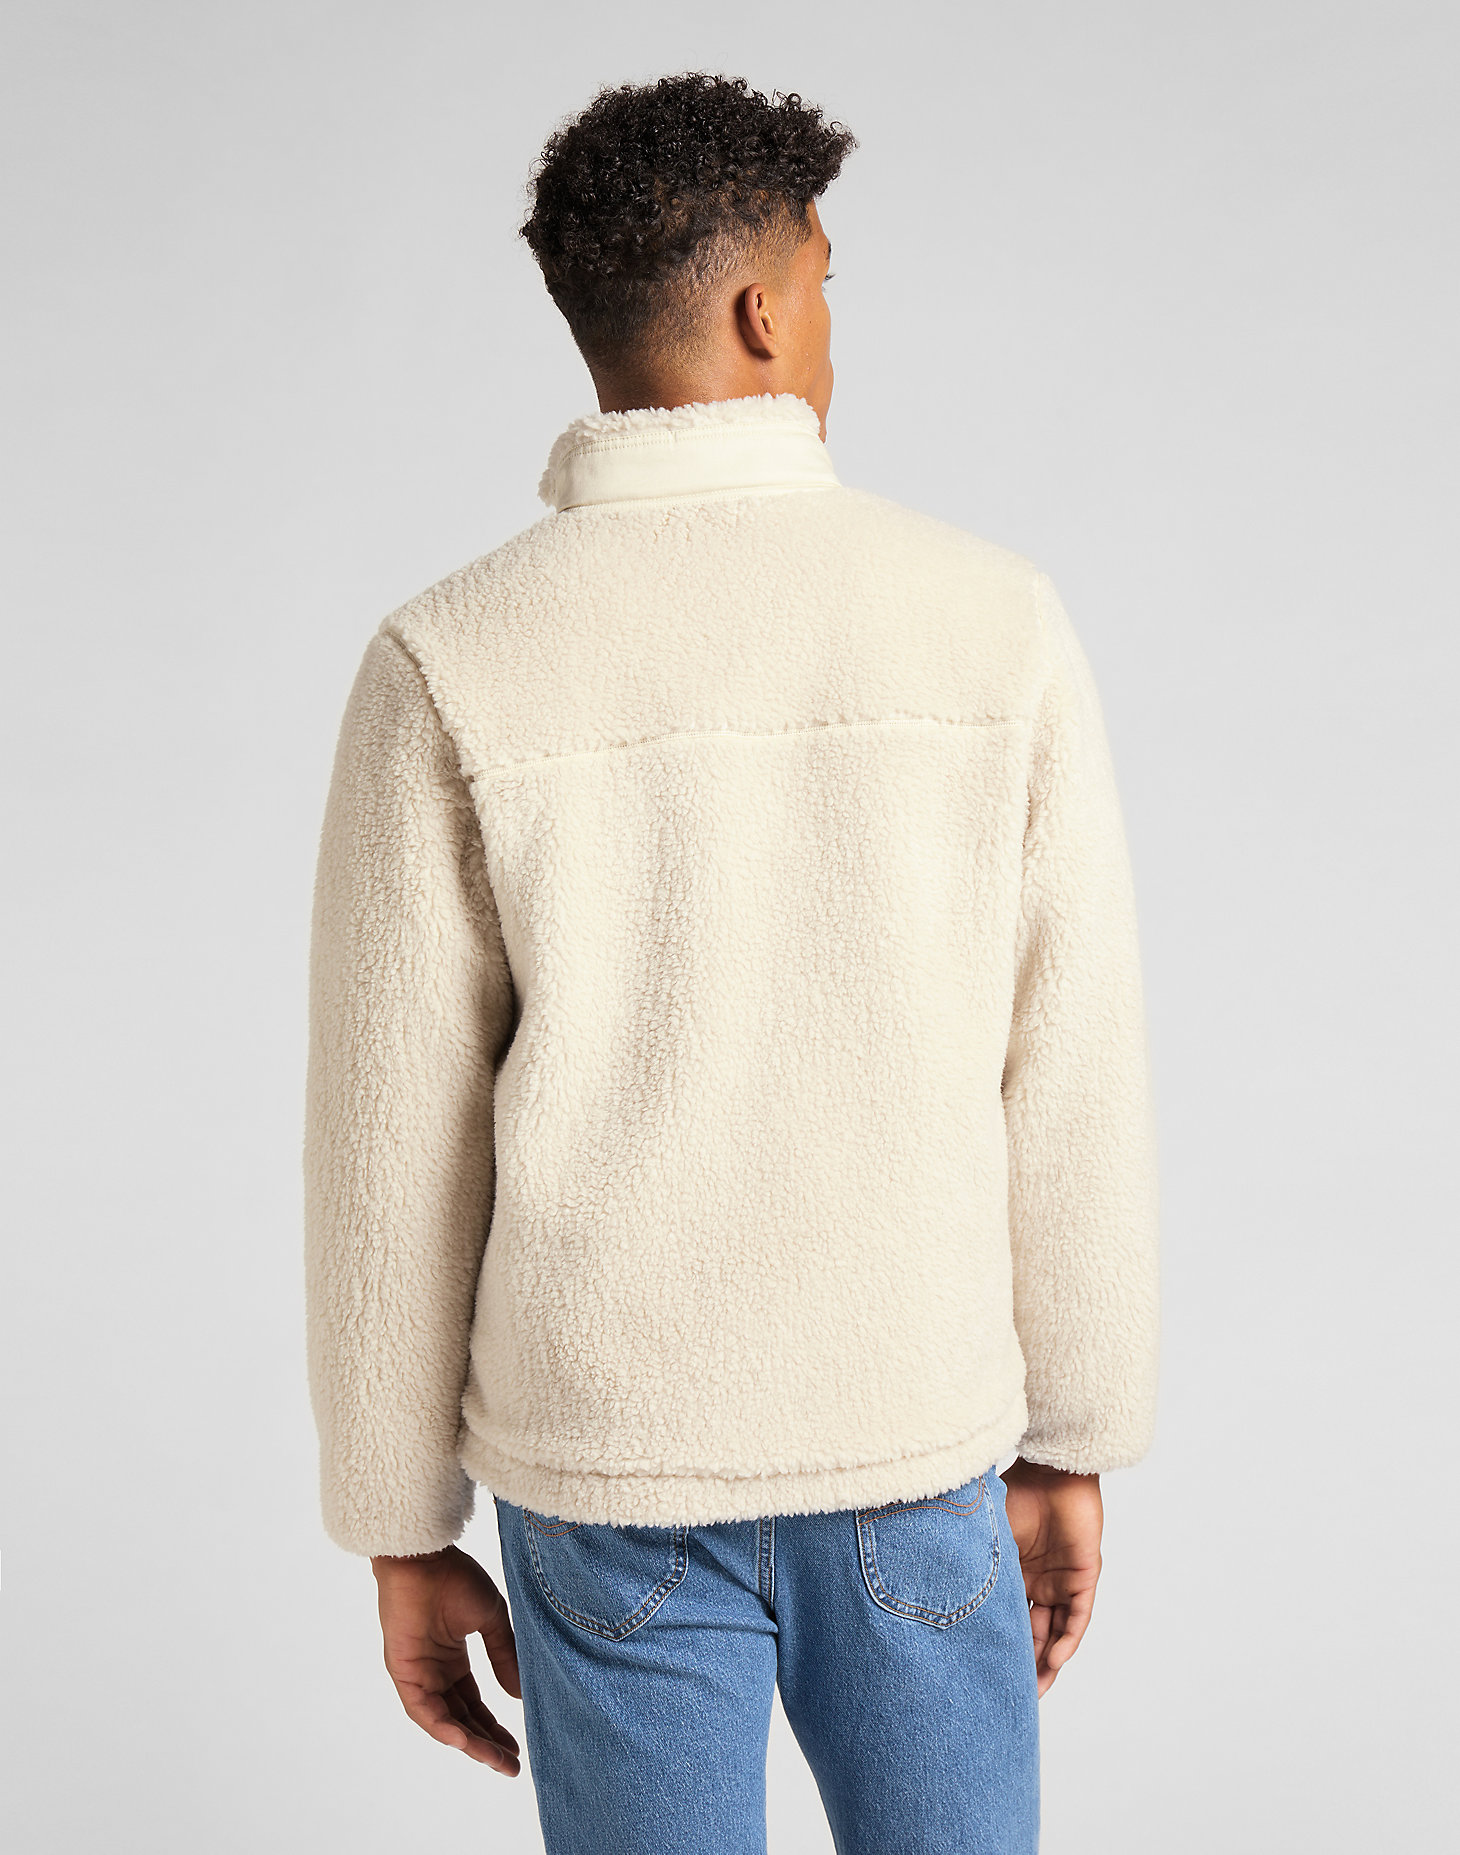 Full Sherpa Jacket in Papyrus alternative view 2